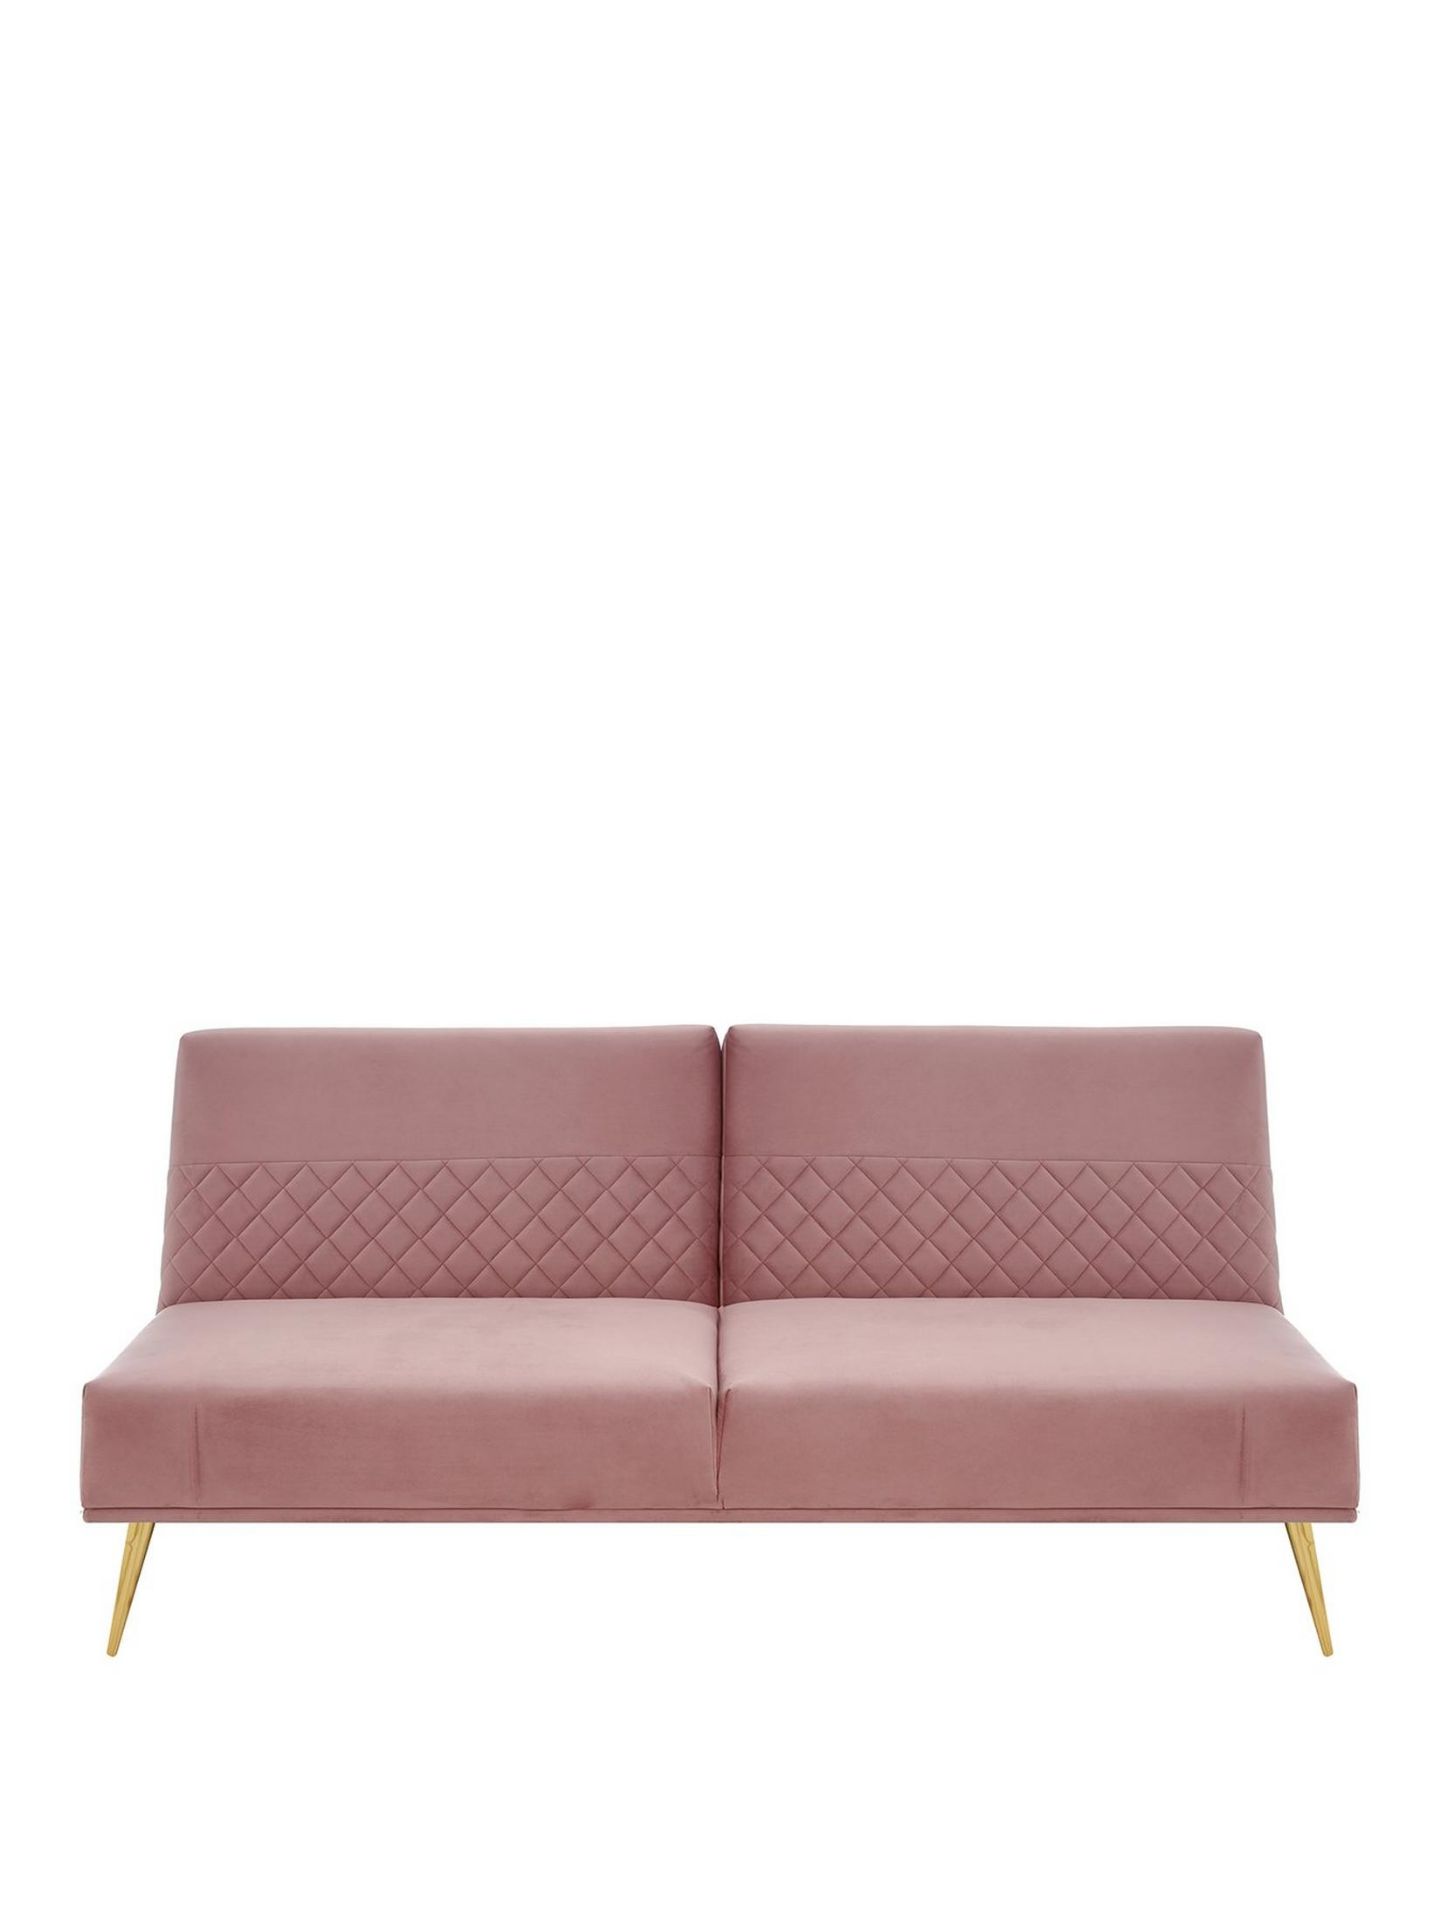 Florence Sofabed. RPP £349.00. Dimensions: As sofa - Height 82, Width 182, Depth 84 cm As bed - - Image 2 of 3